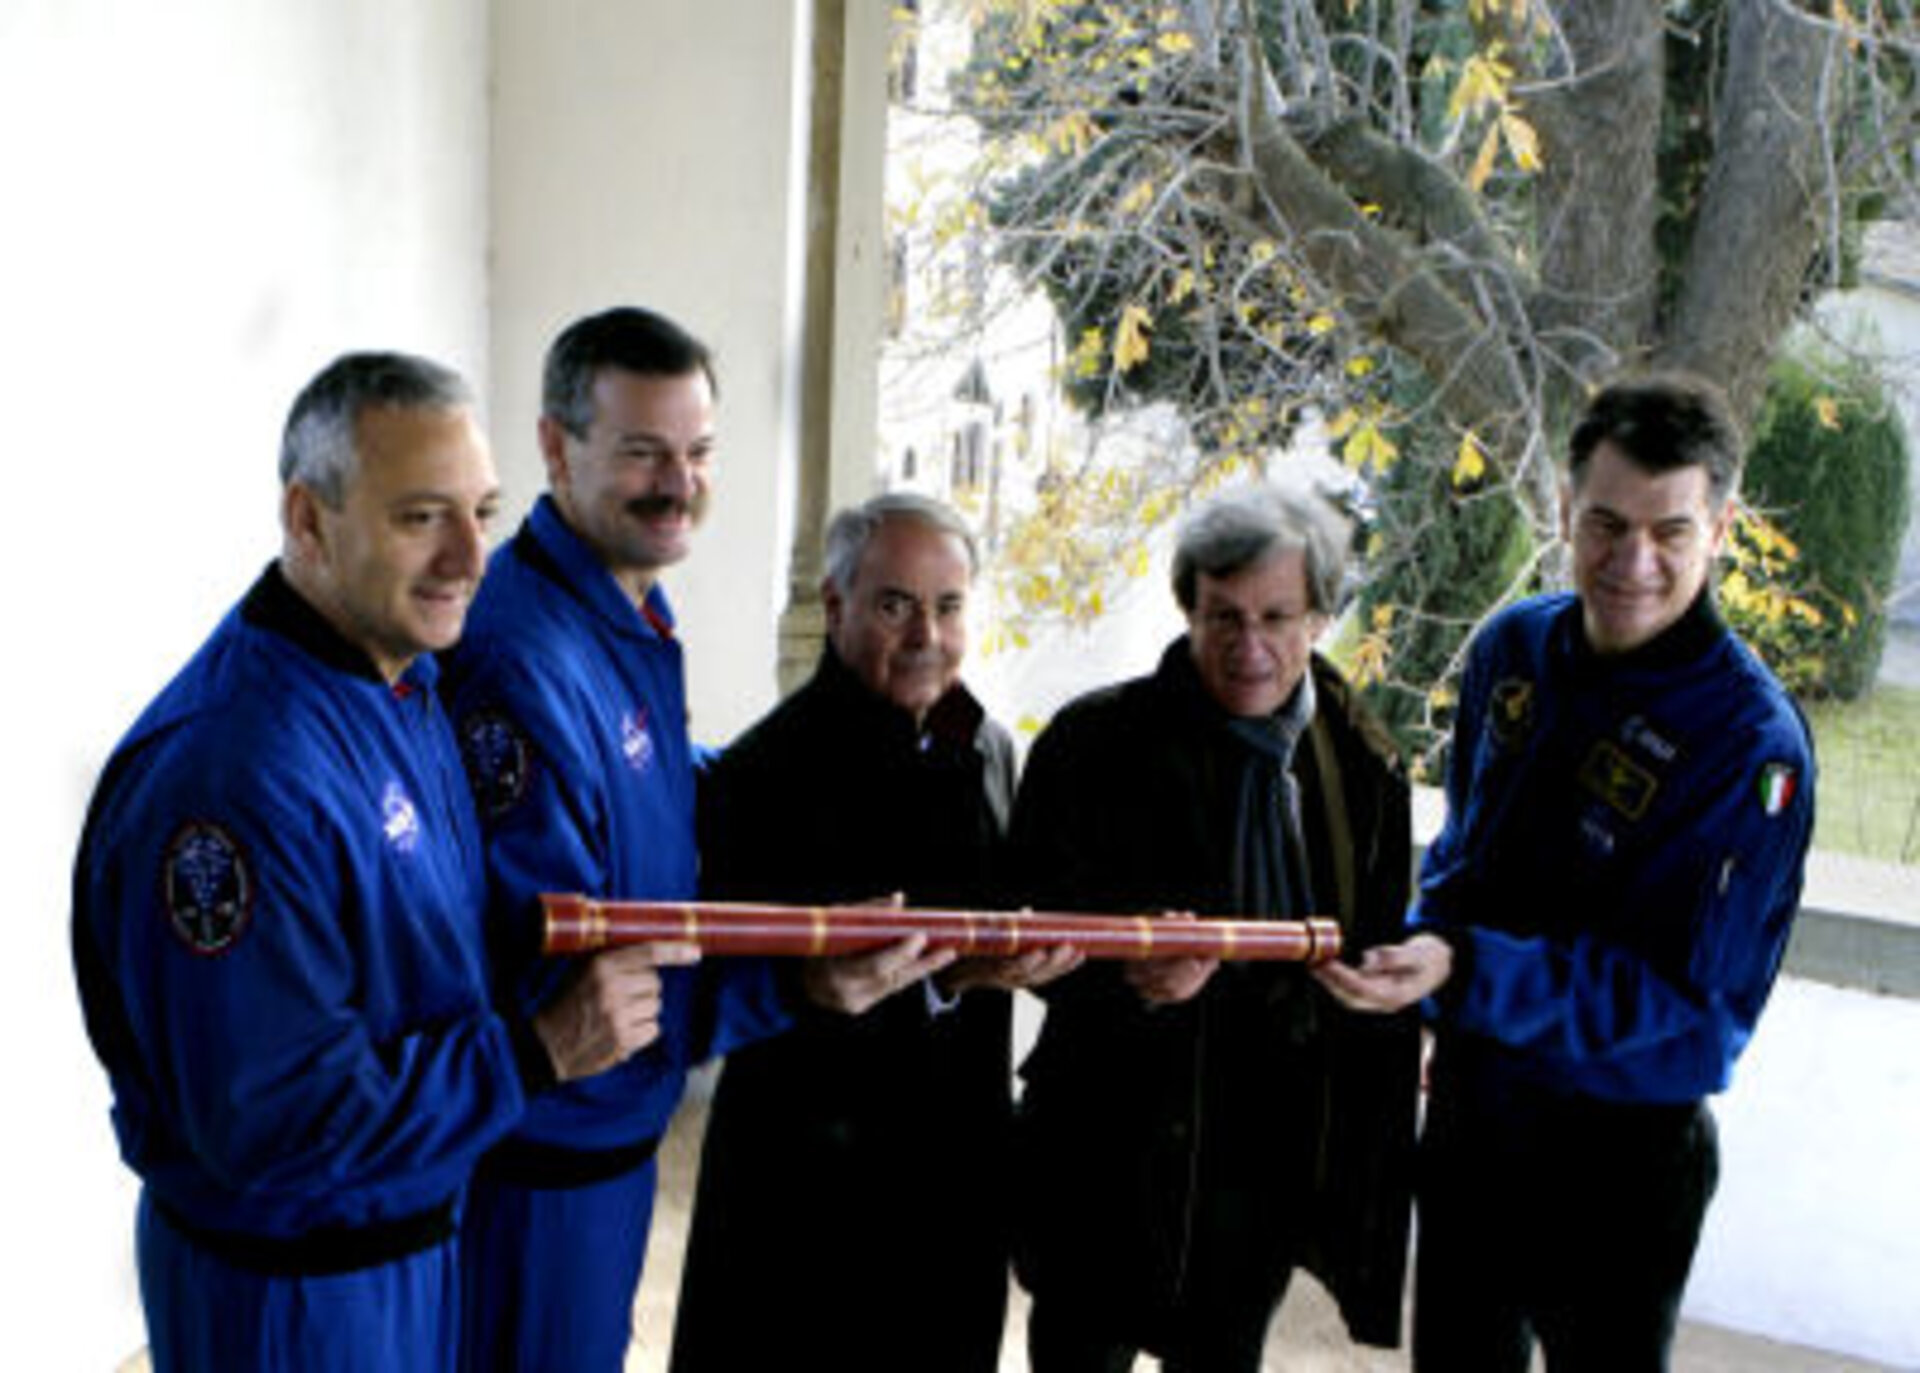 Replica of the Galileo’s telescope is back in Florence